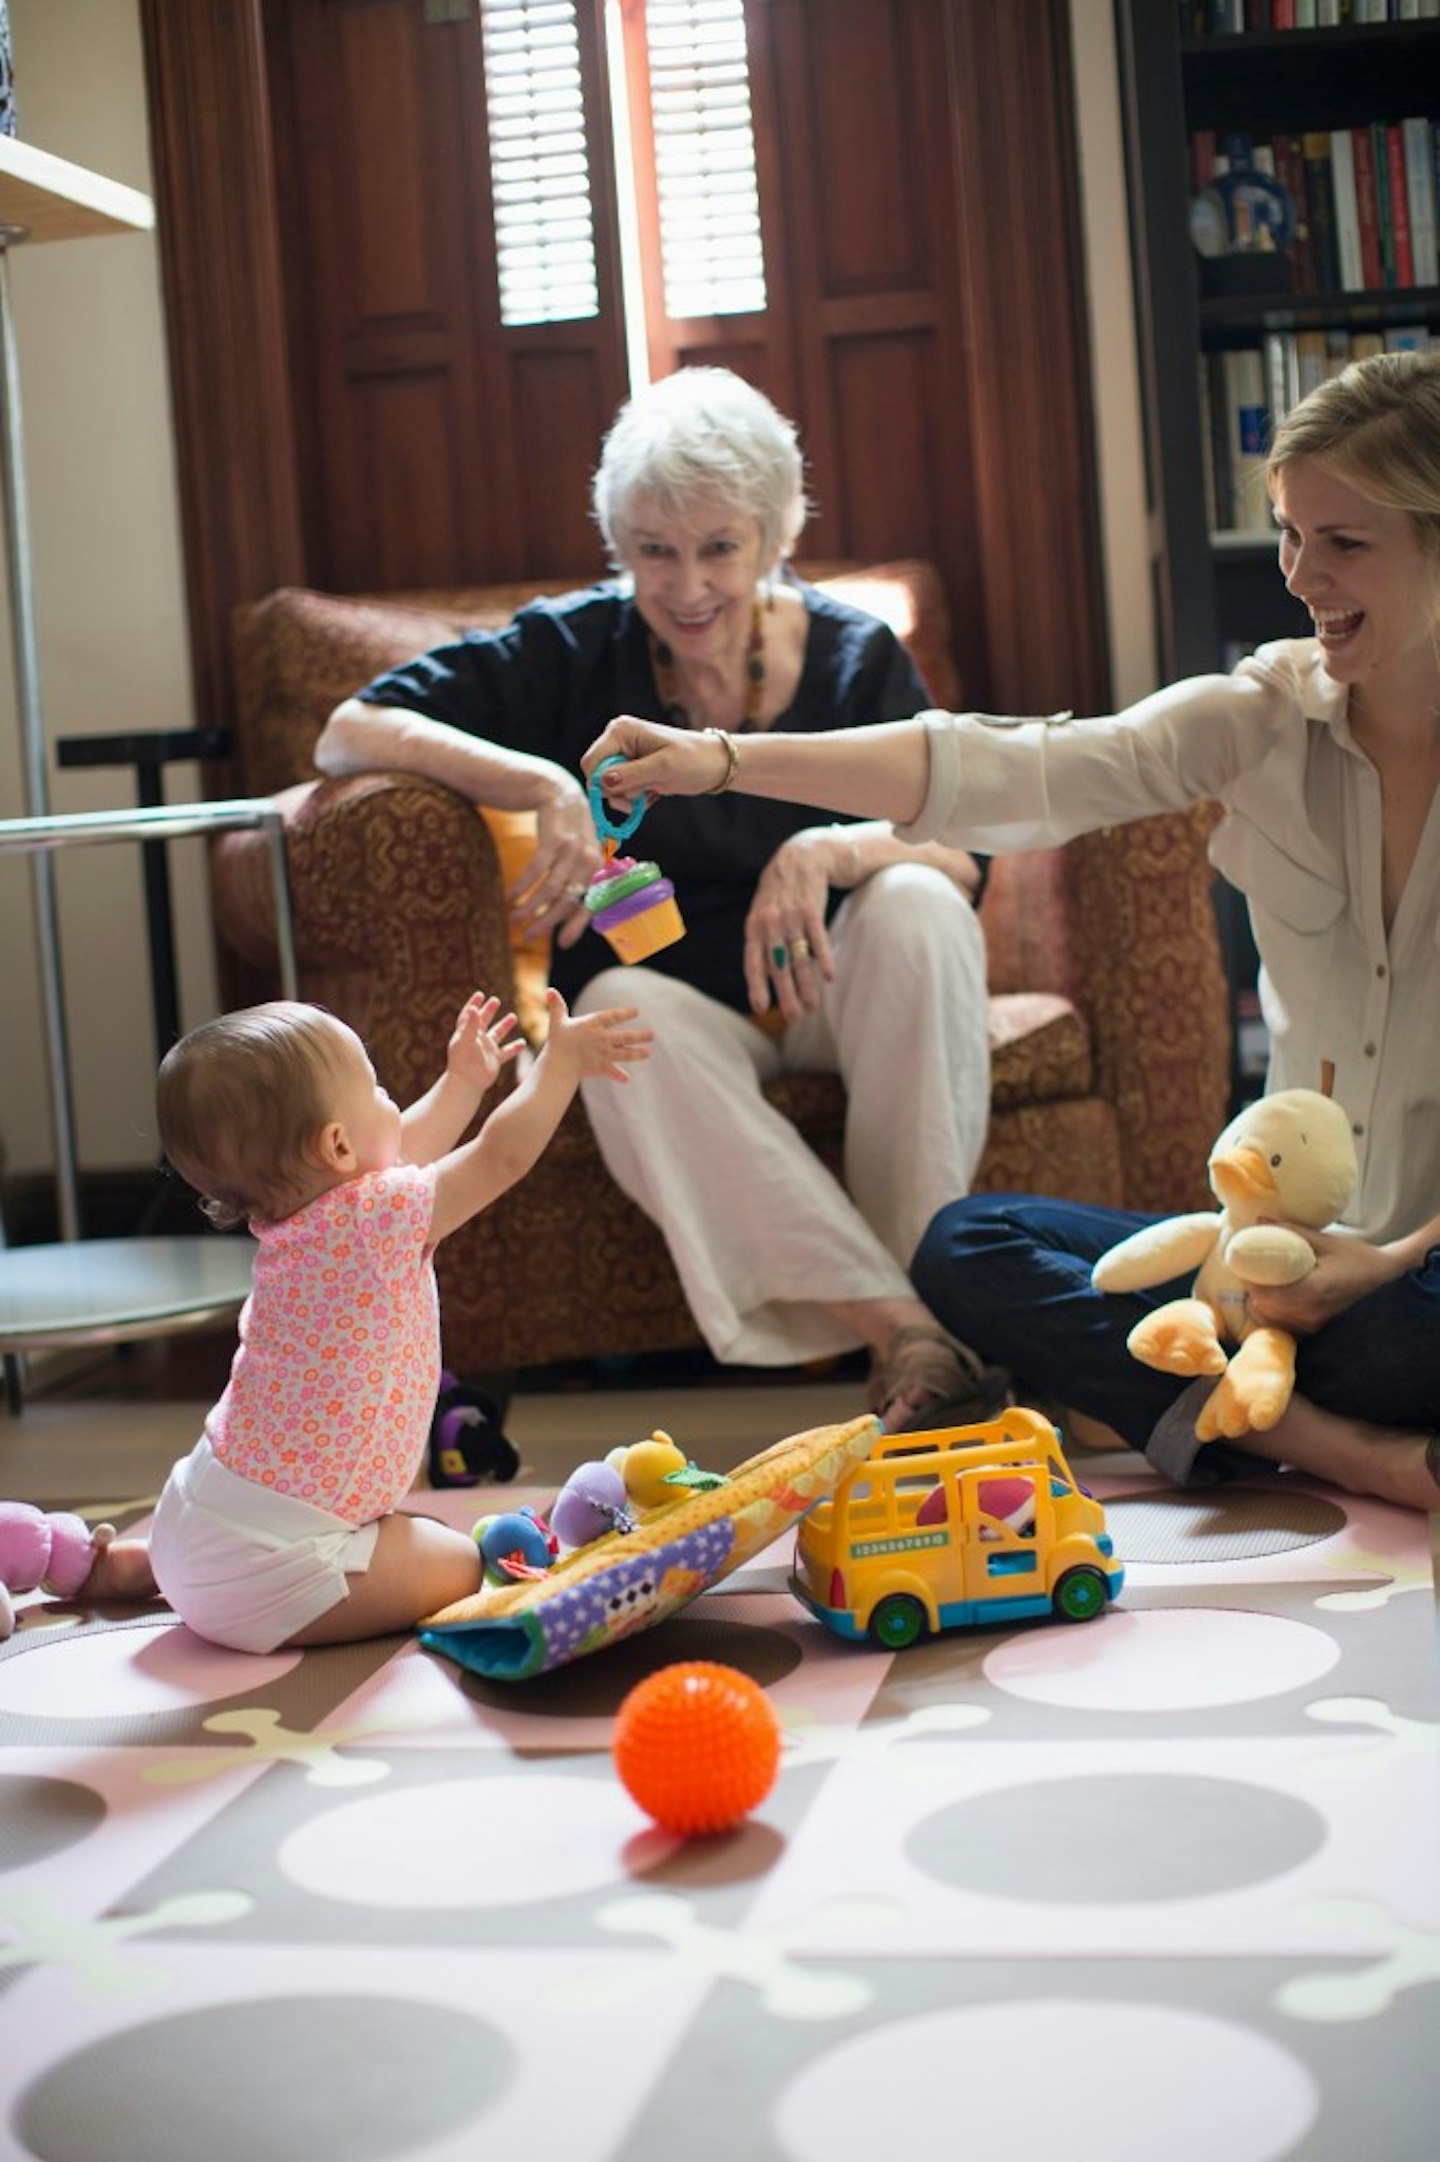 Childcare Update: One In Four Parents Don’t Ask For Family Help